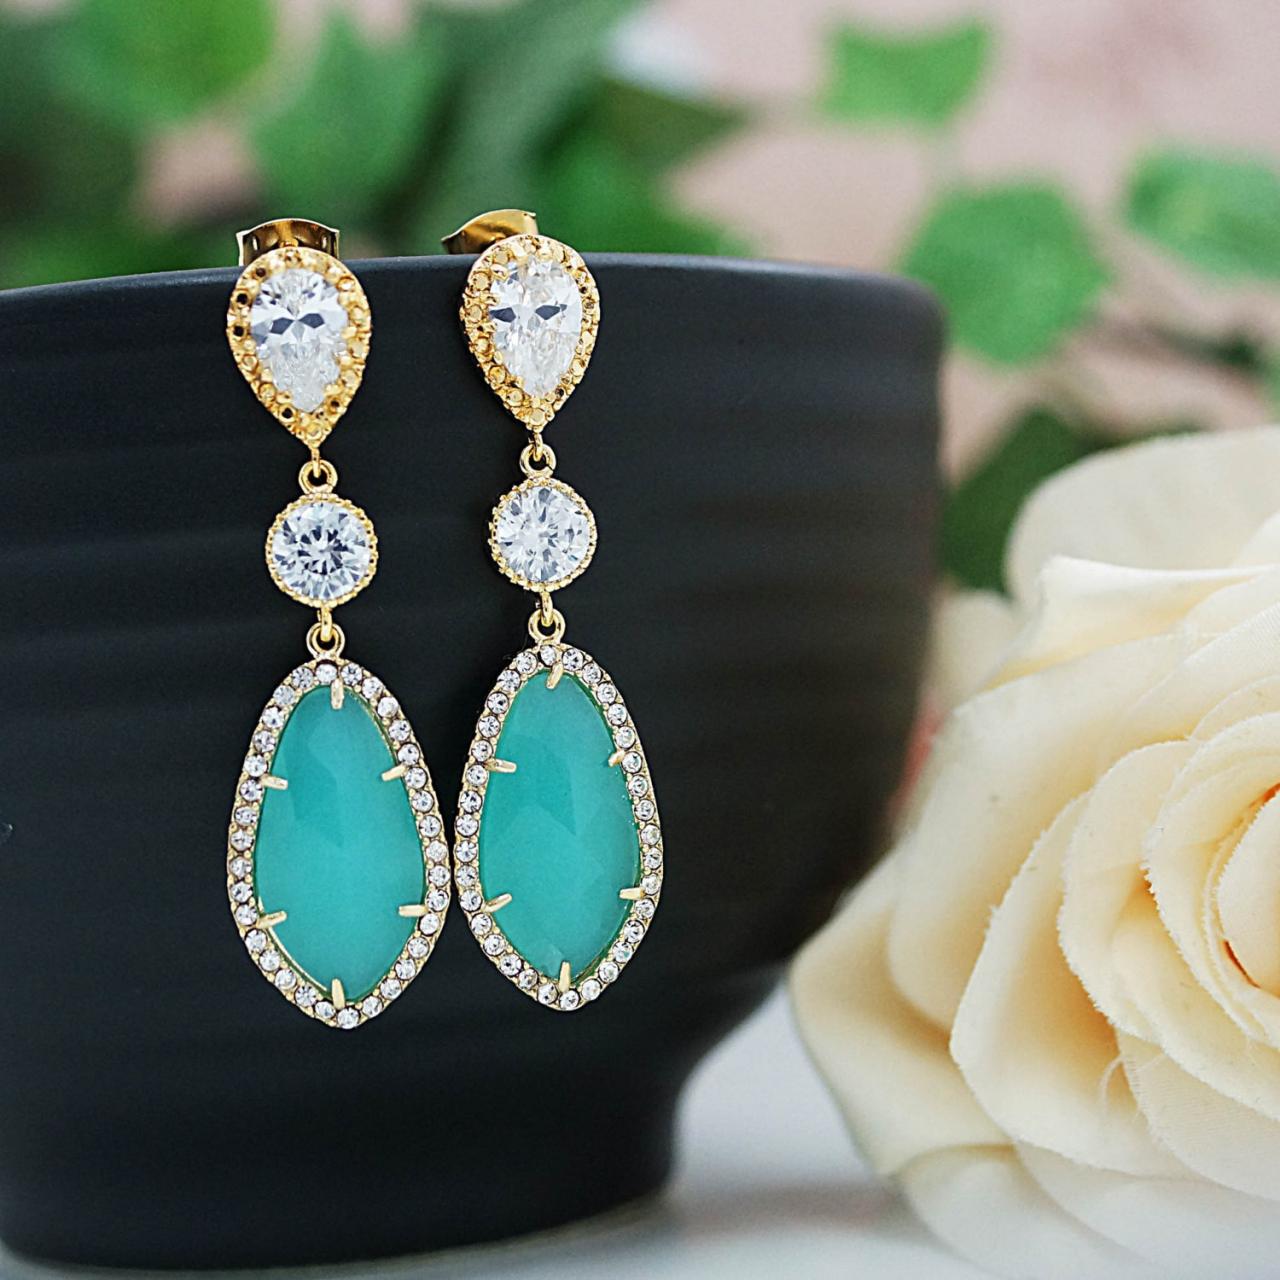 Wedding Jewelry Bridesmaids Gift Bridal Earrings Bridesmaid Earrings Dangle Earrings Lux Mint Opal Glass With Cubic Zirconia Drop Earrings